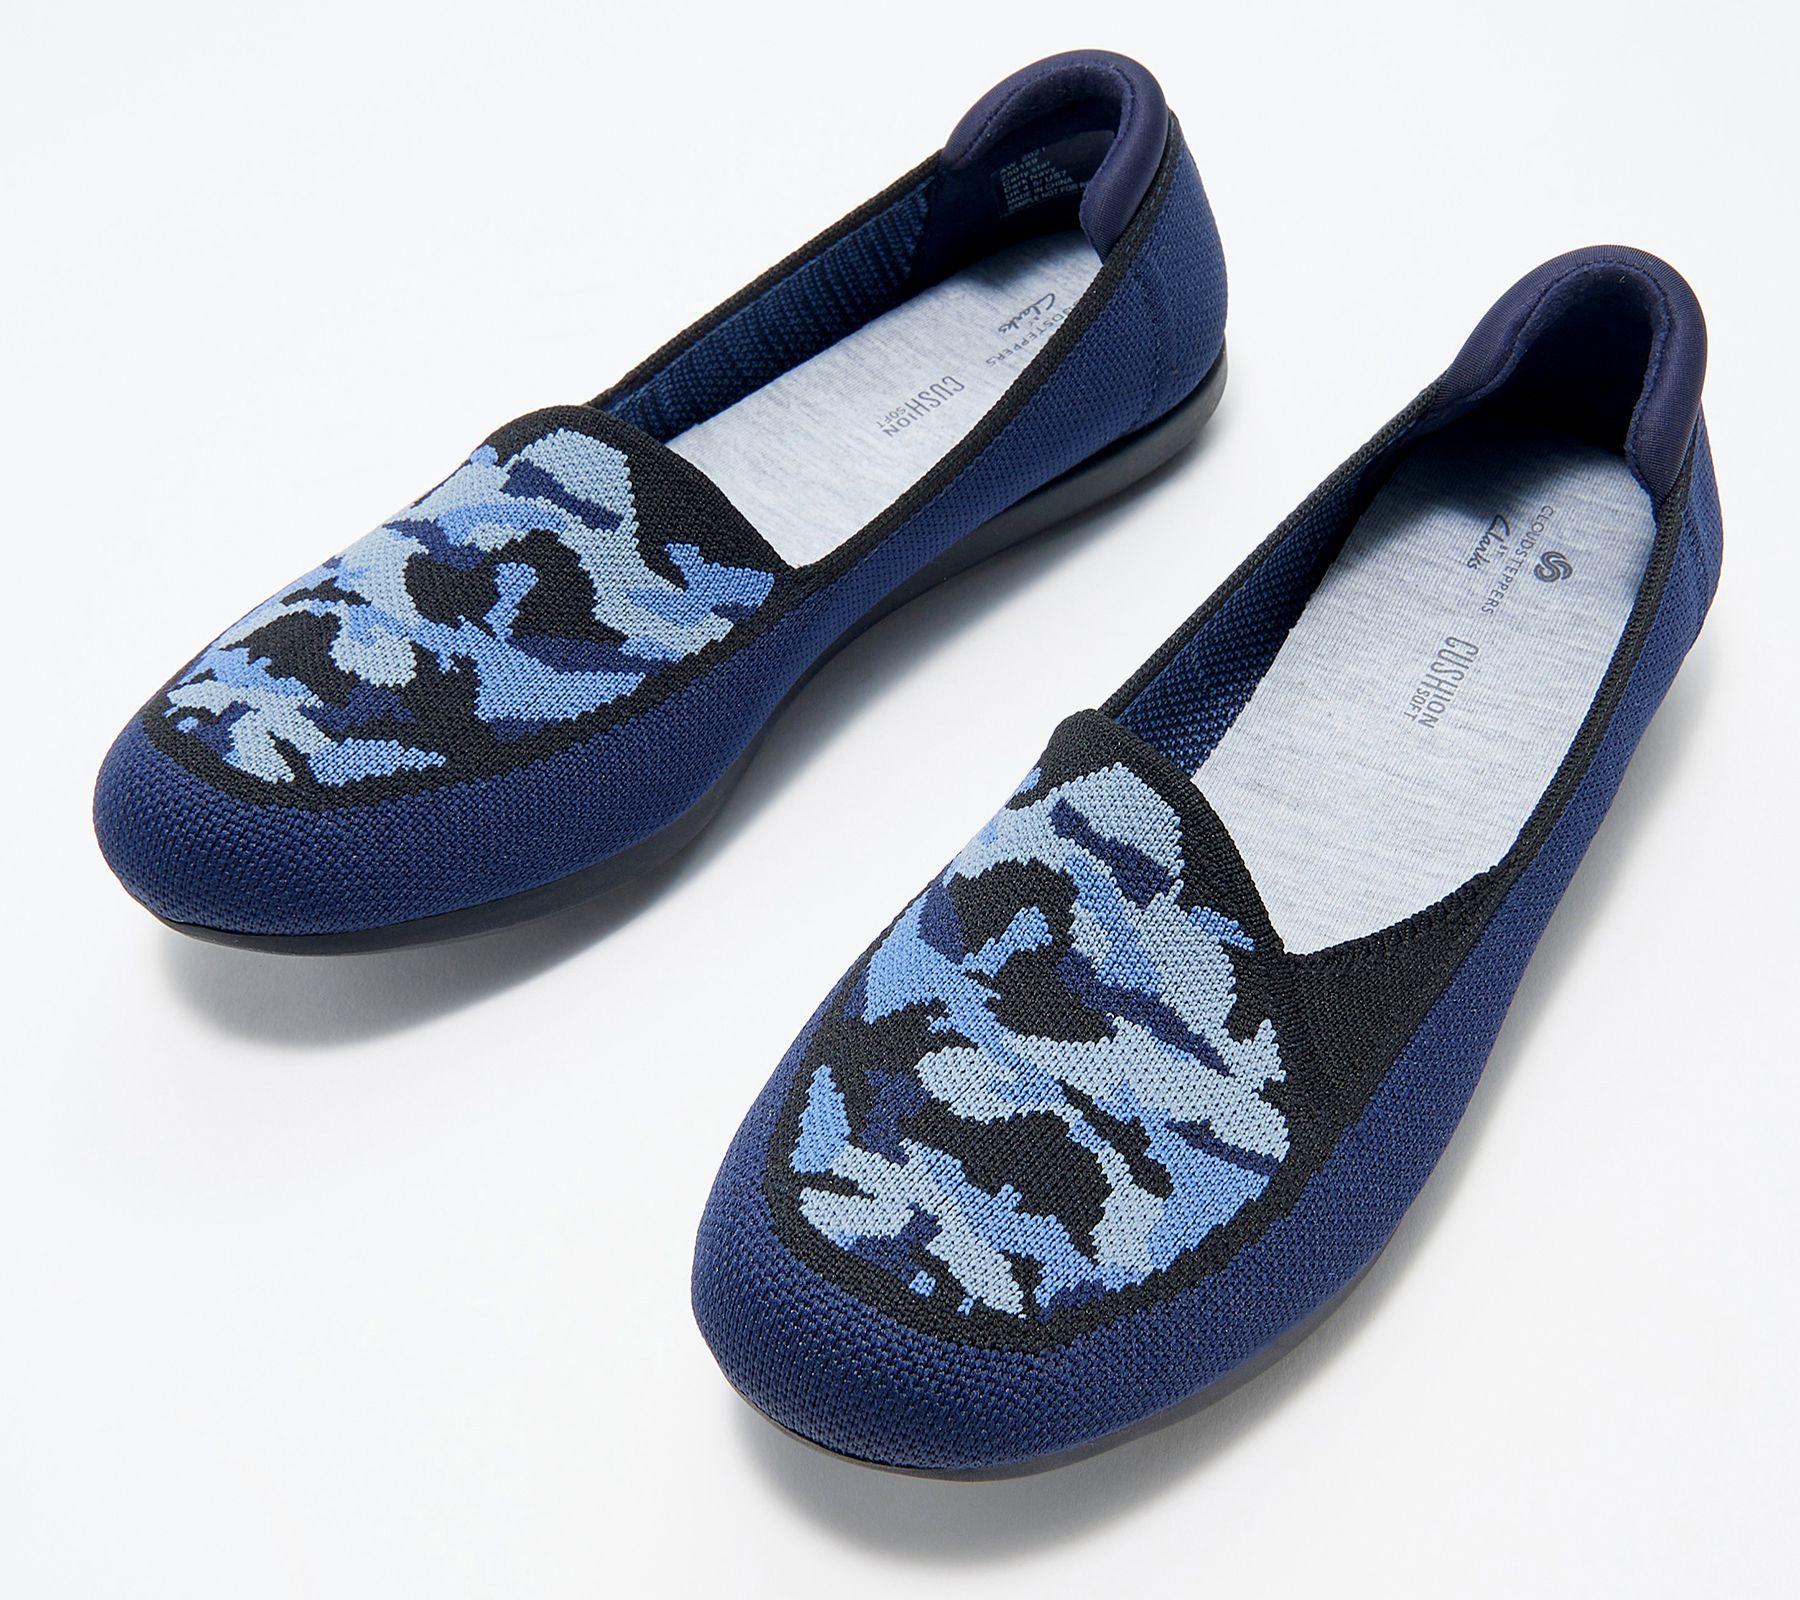 Aprovechar galope amargo "As Is" Clarks Cloudsteppers Washable Knit Loafers - Carly Star - QVC.com